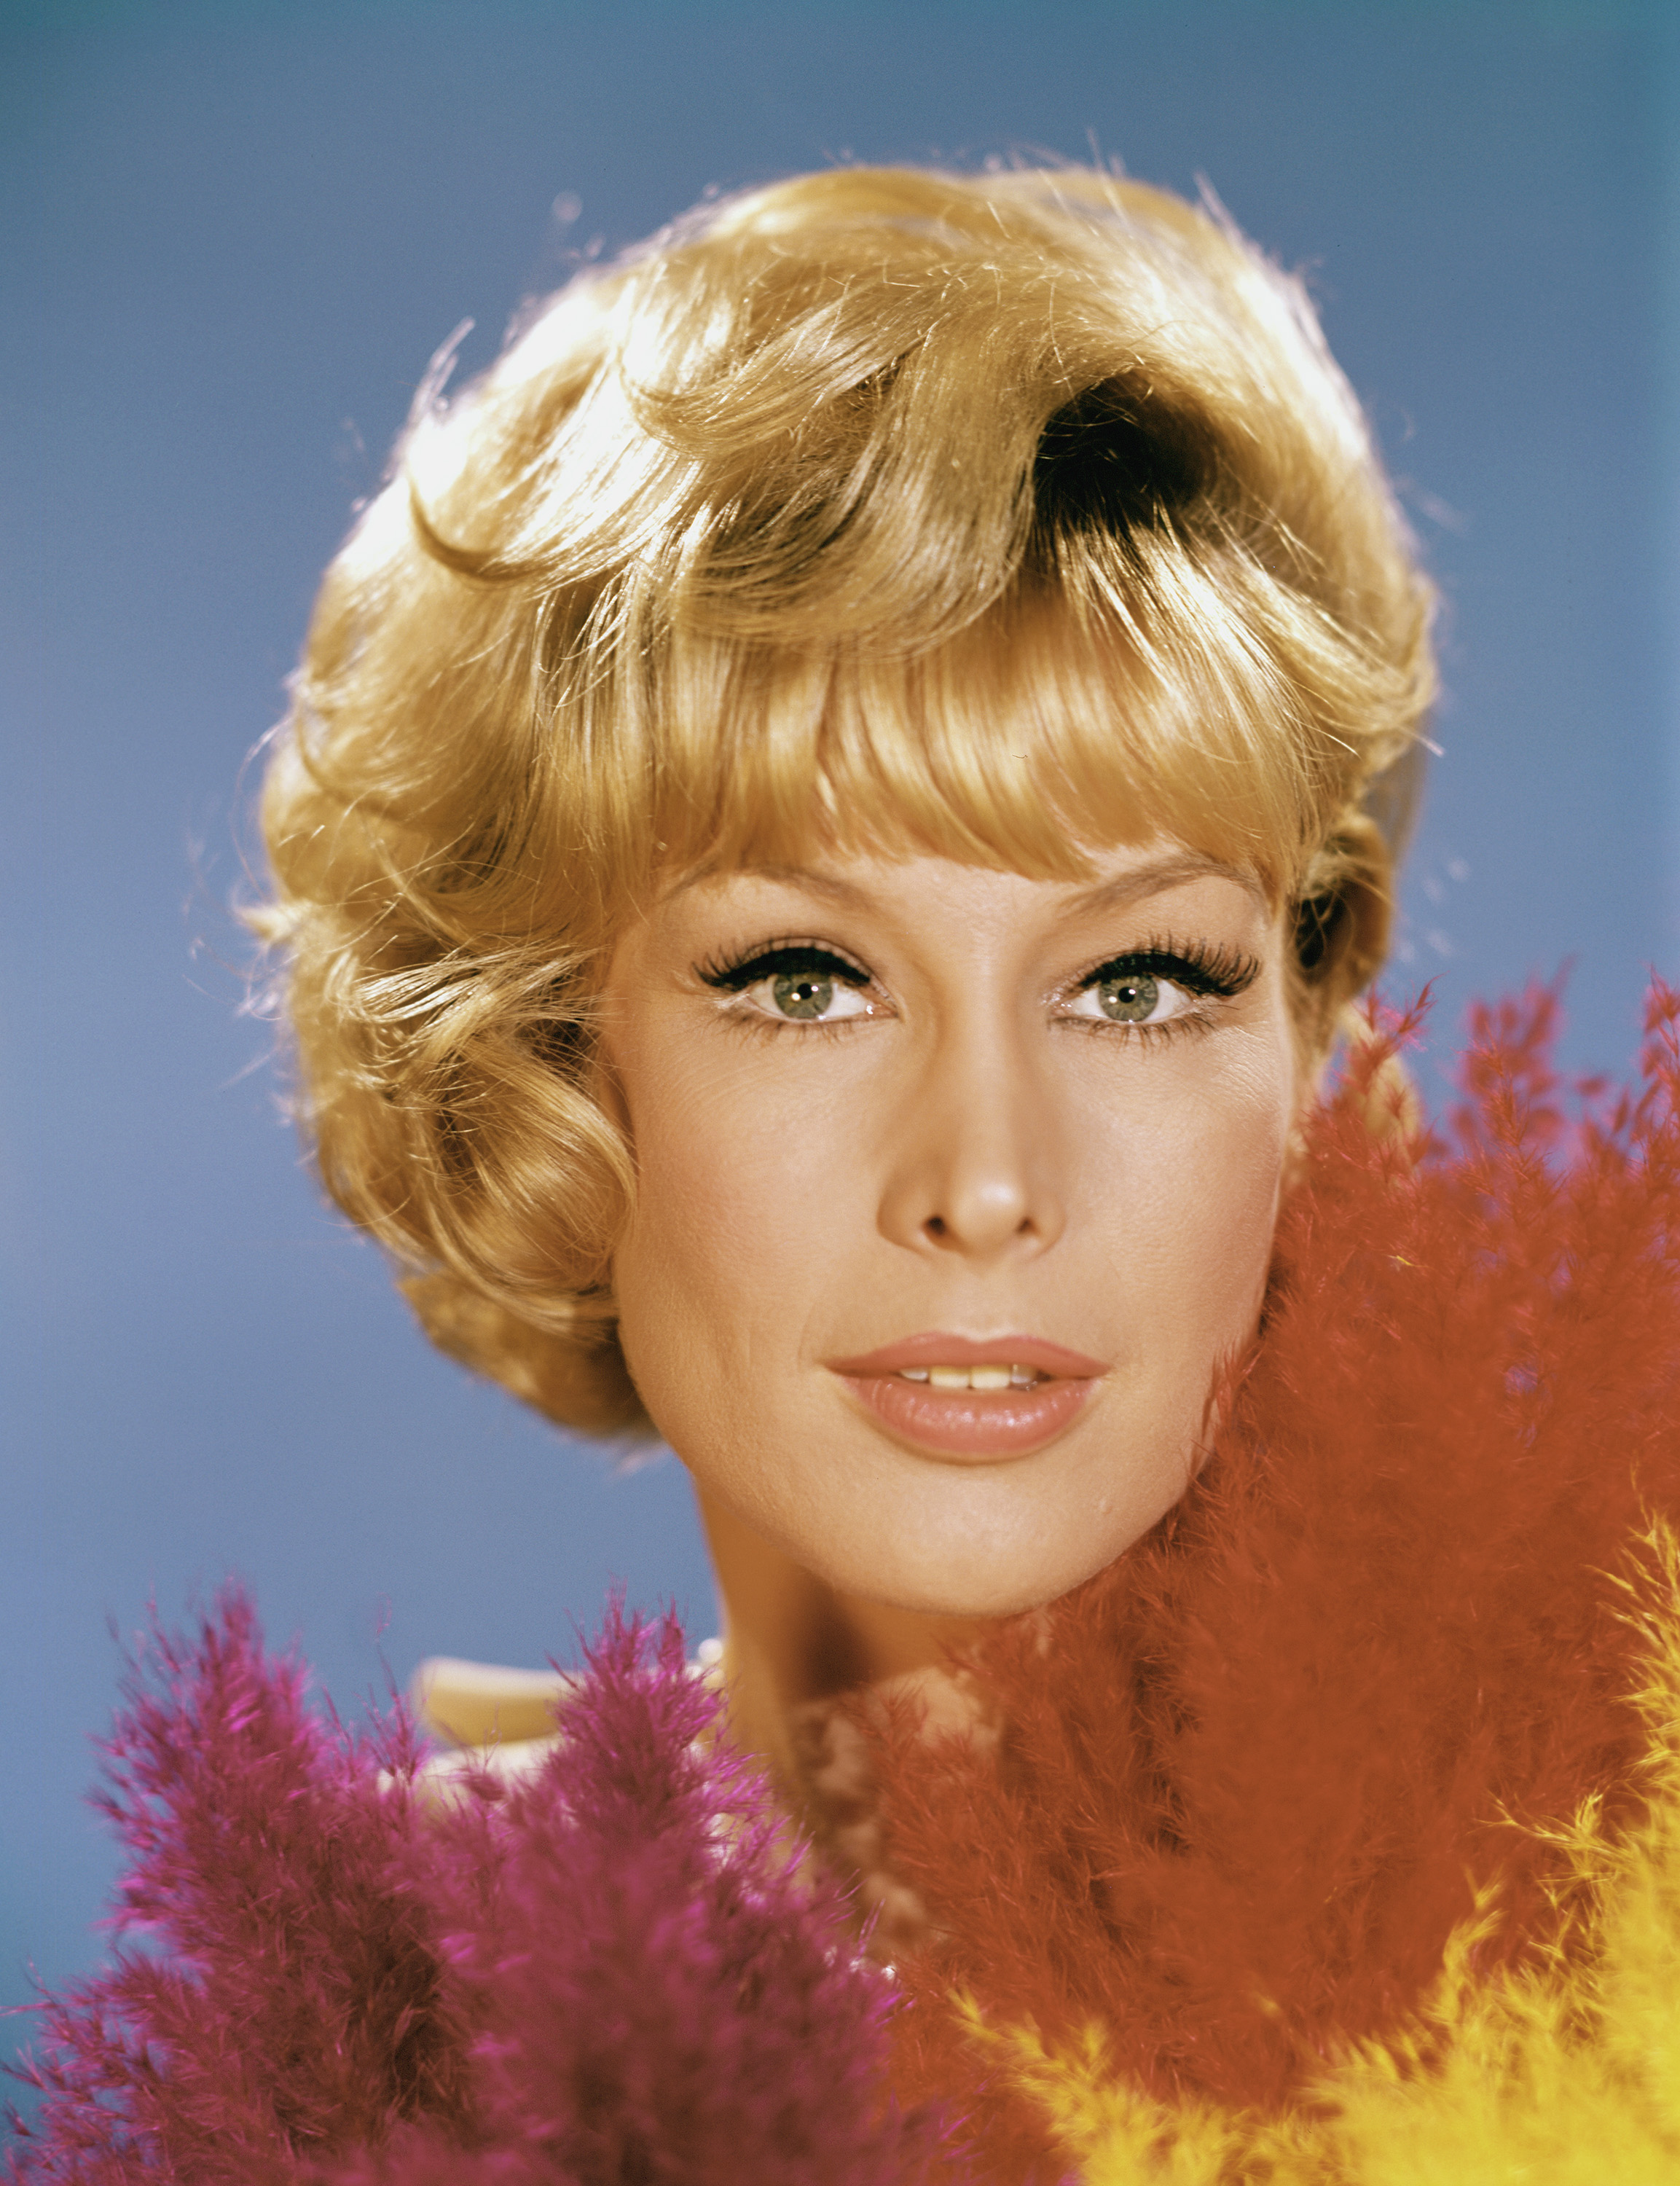 Barbara Eden sporting a short hairstyle and eye makeup. | Source: Getty Images